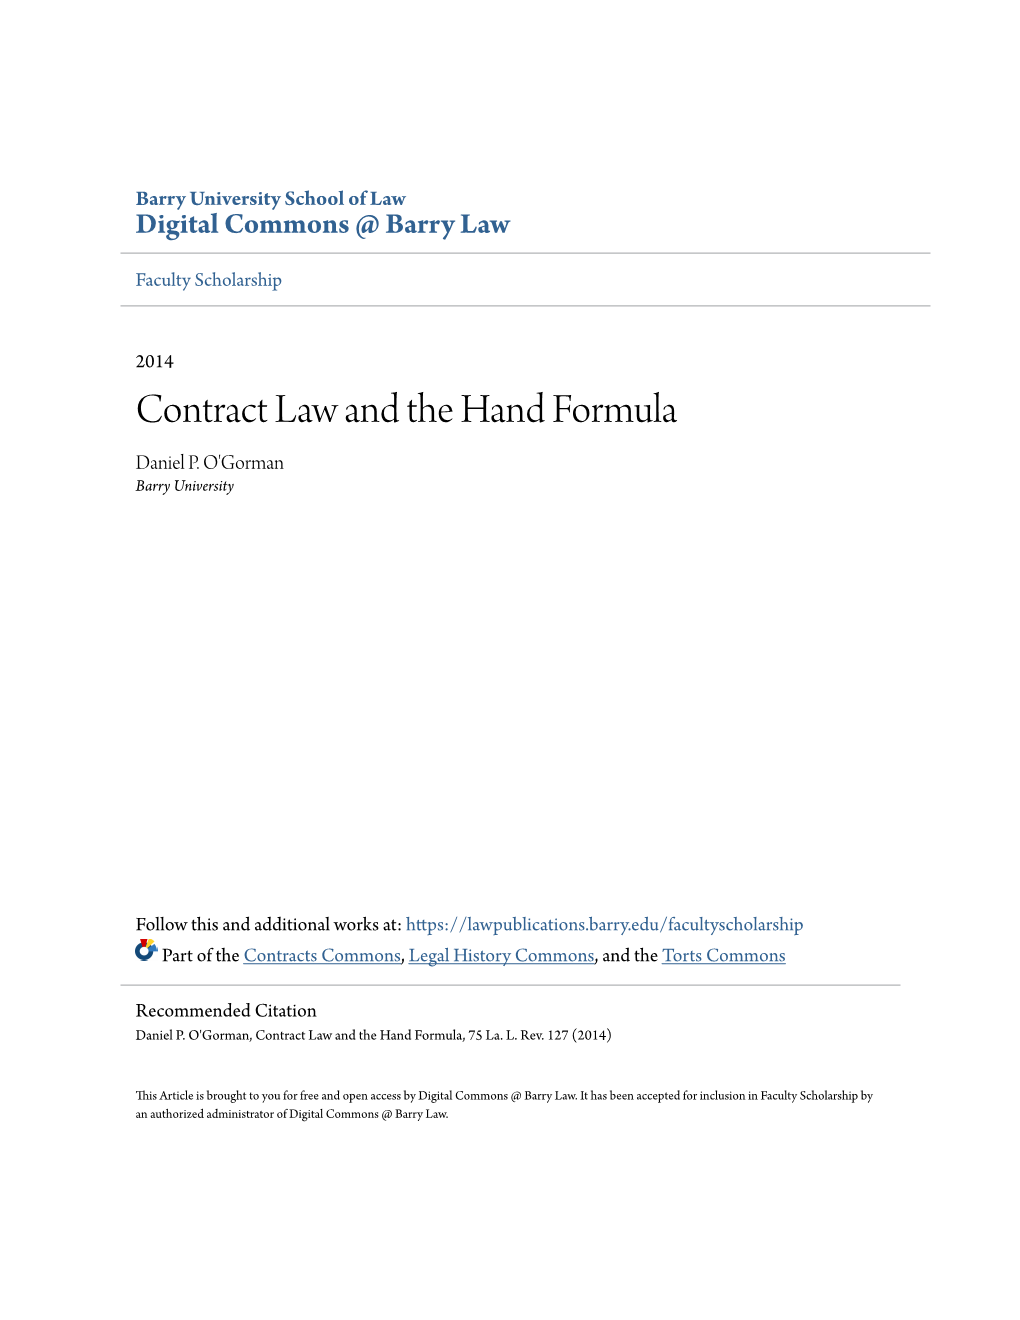 Contract Law and the Hand Formula Daniel P